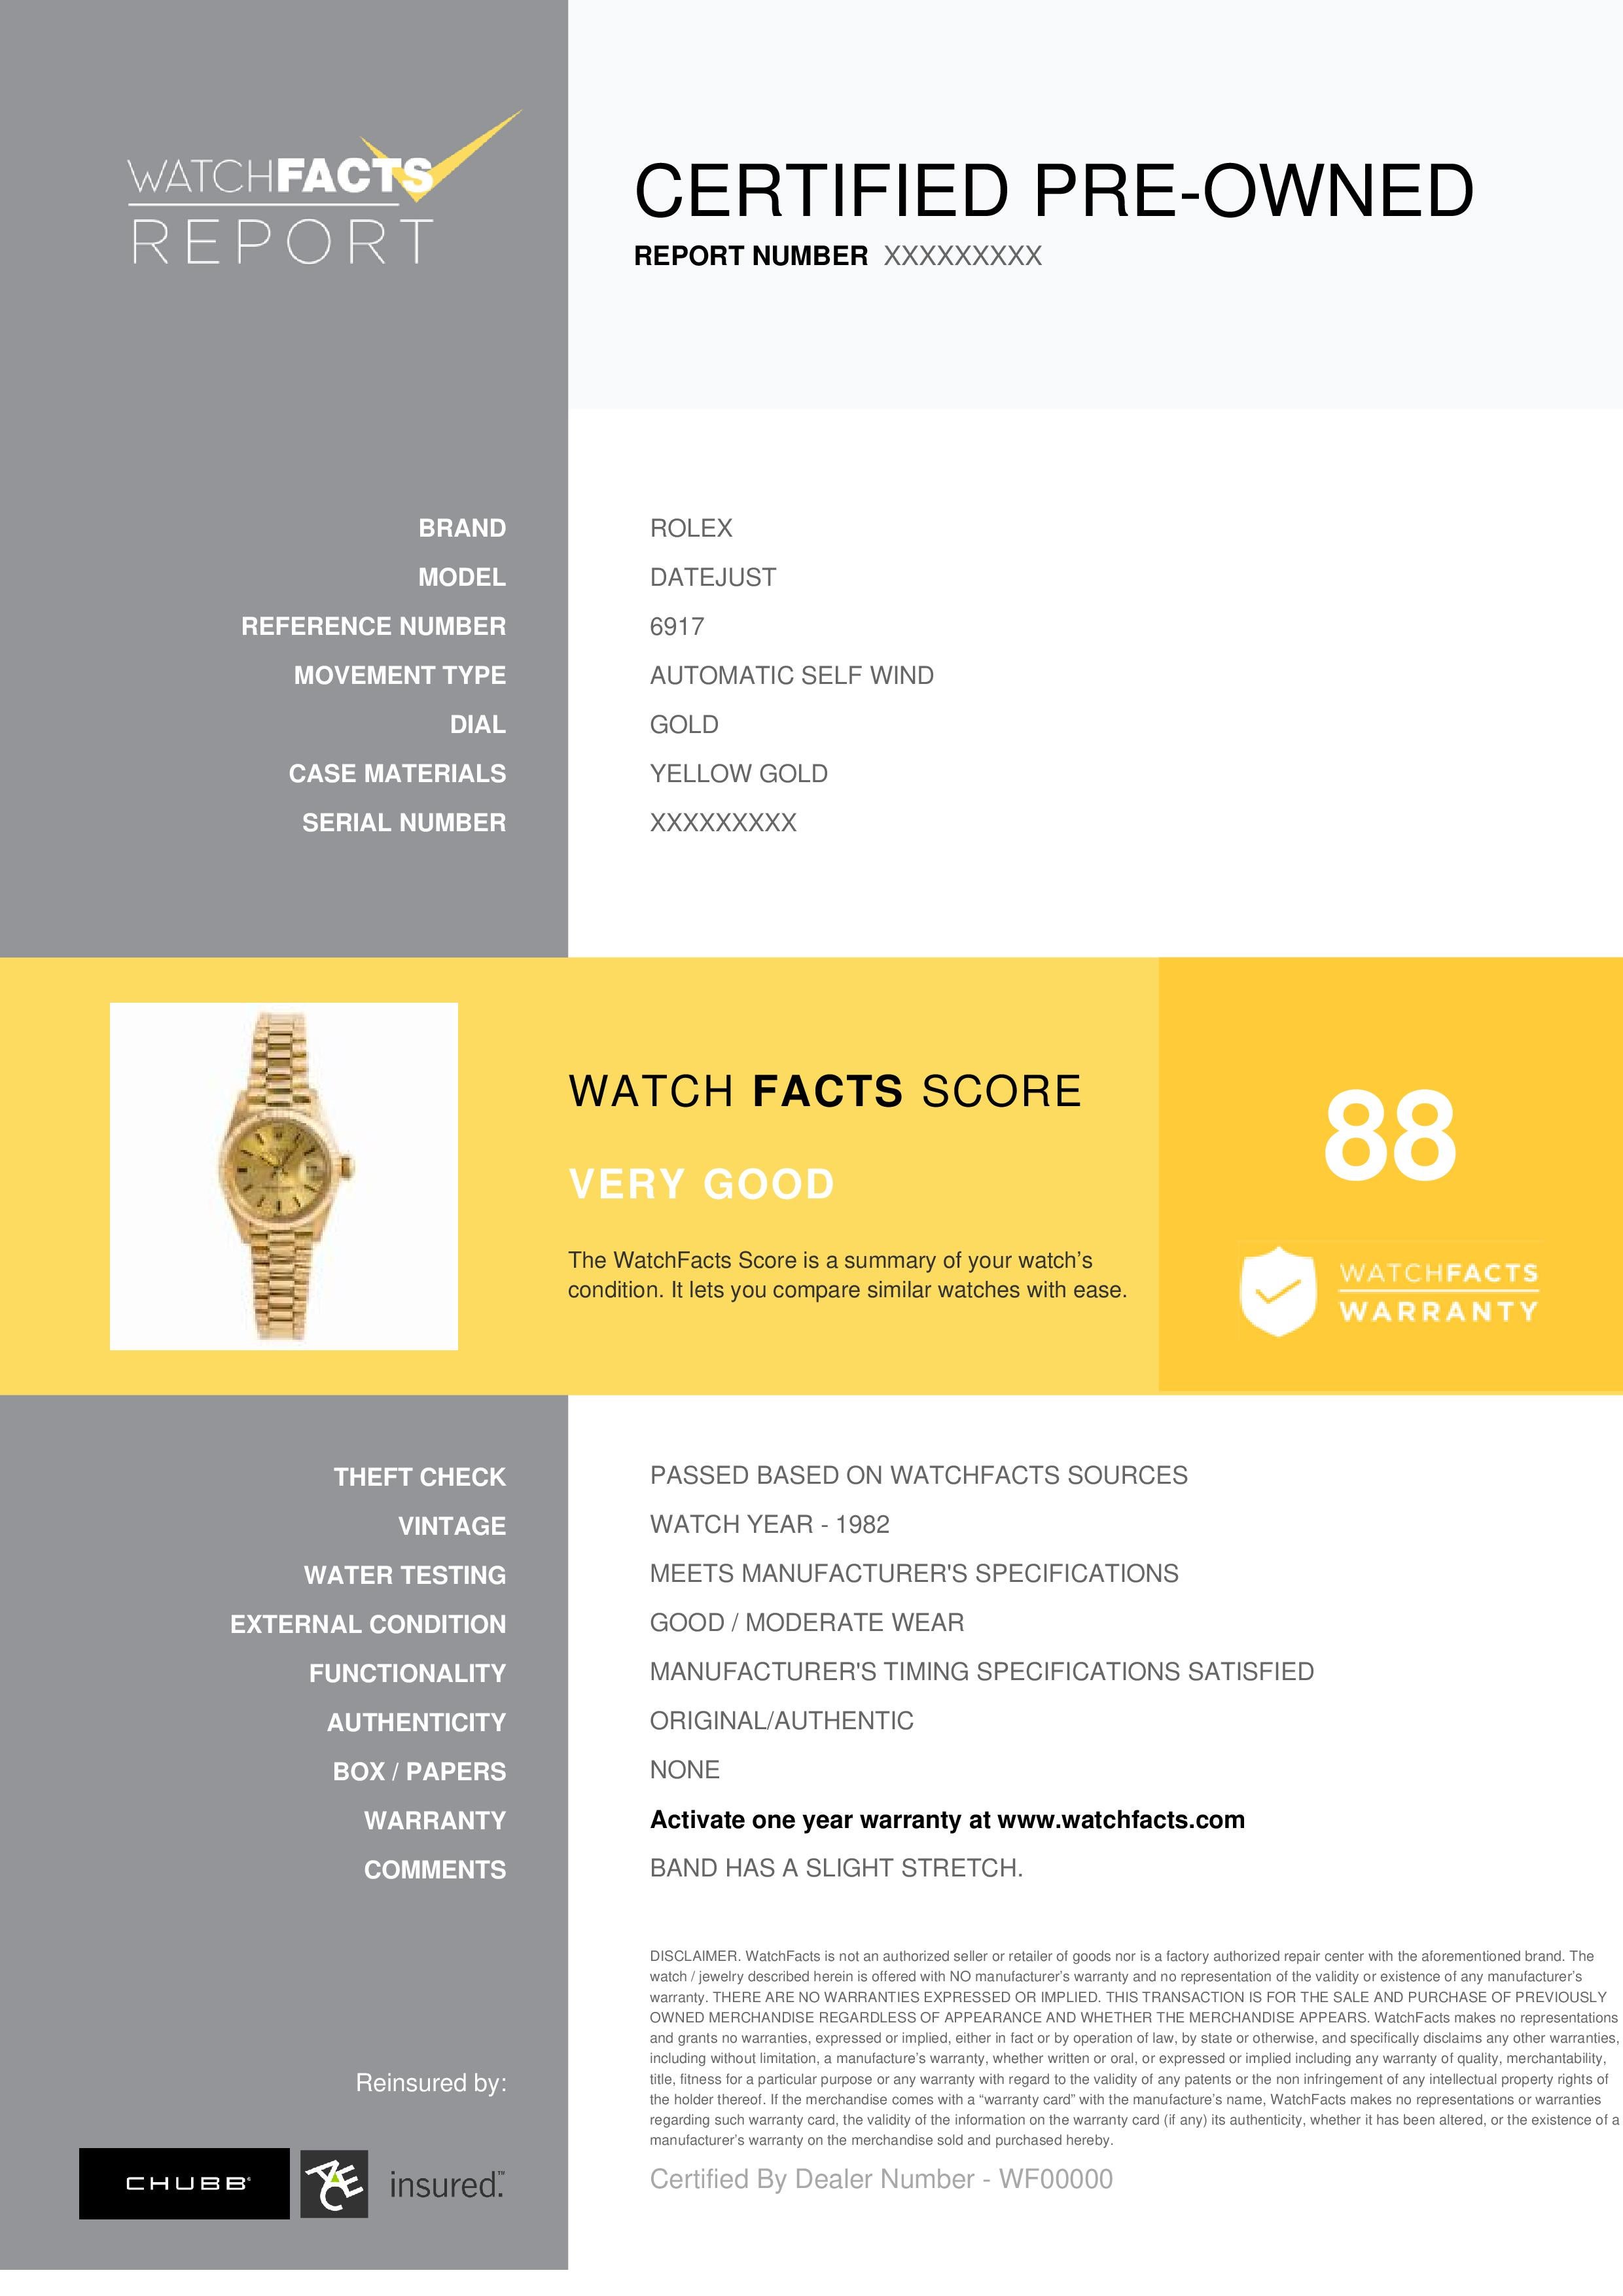 Rolex Datejust Reference #: 6917. Womens Automatic Self Wind Watch Yellow Gold Gold 26 MM. Verified and Certified by WatchFacts. 1 year warranty offered by WatchFacts.
